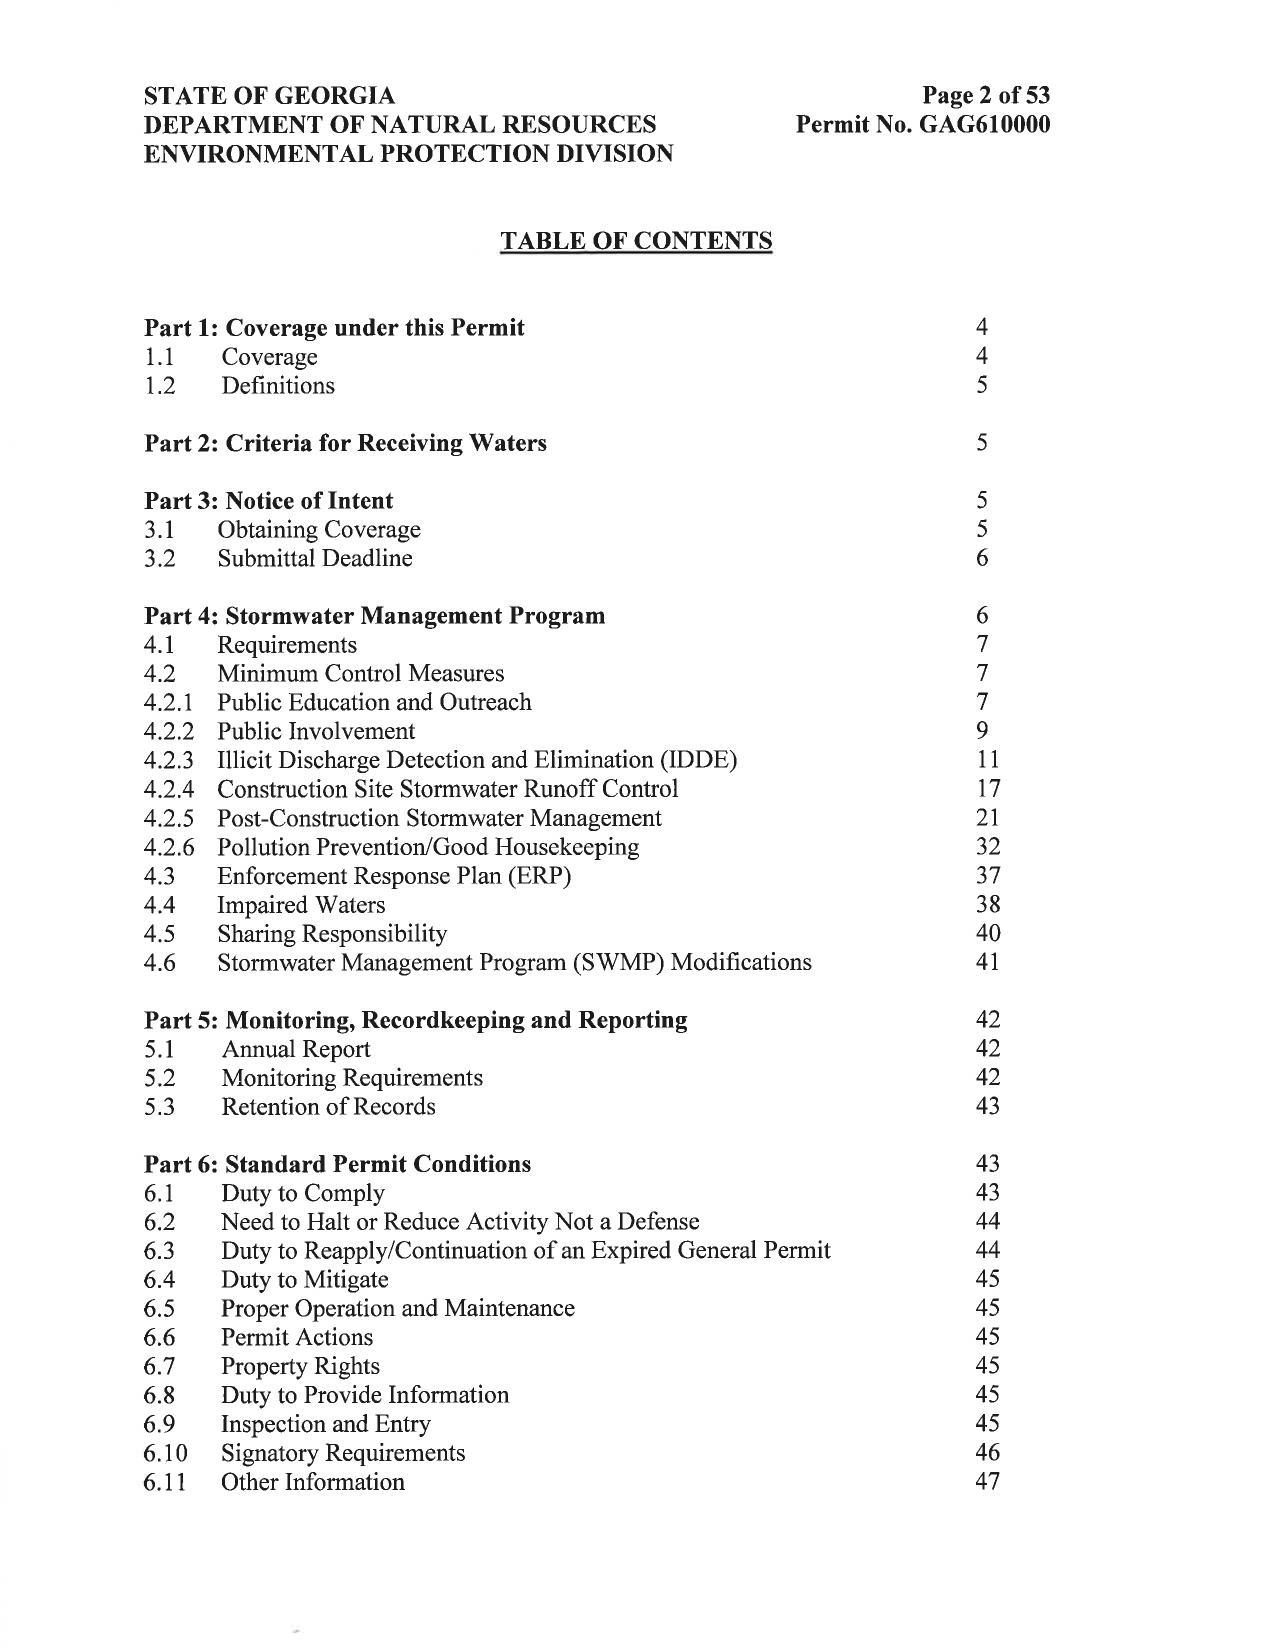 (1 of 2) Table of Contents